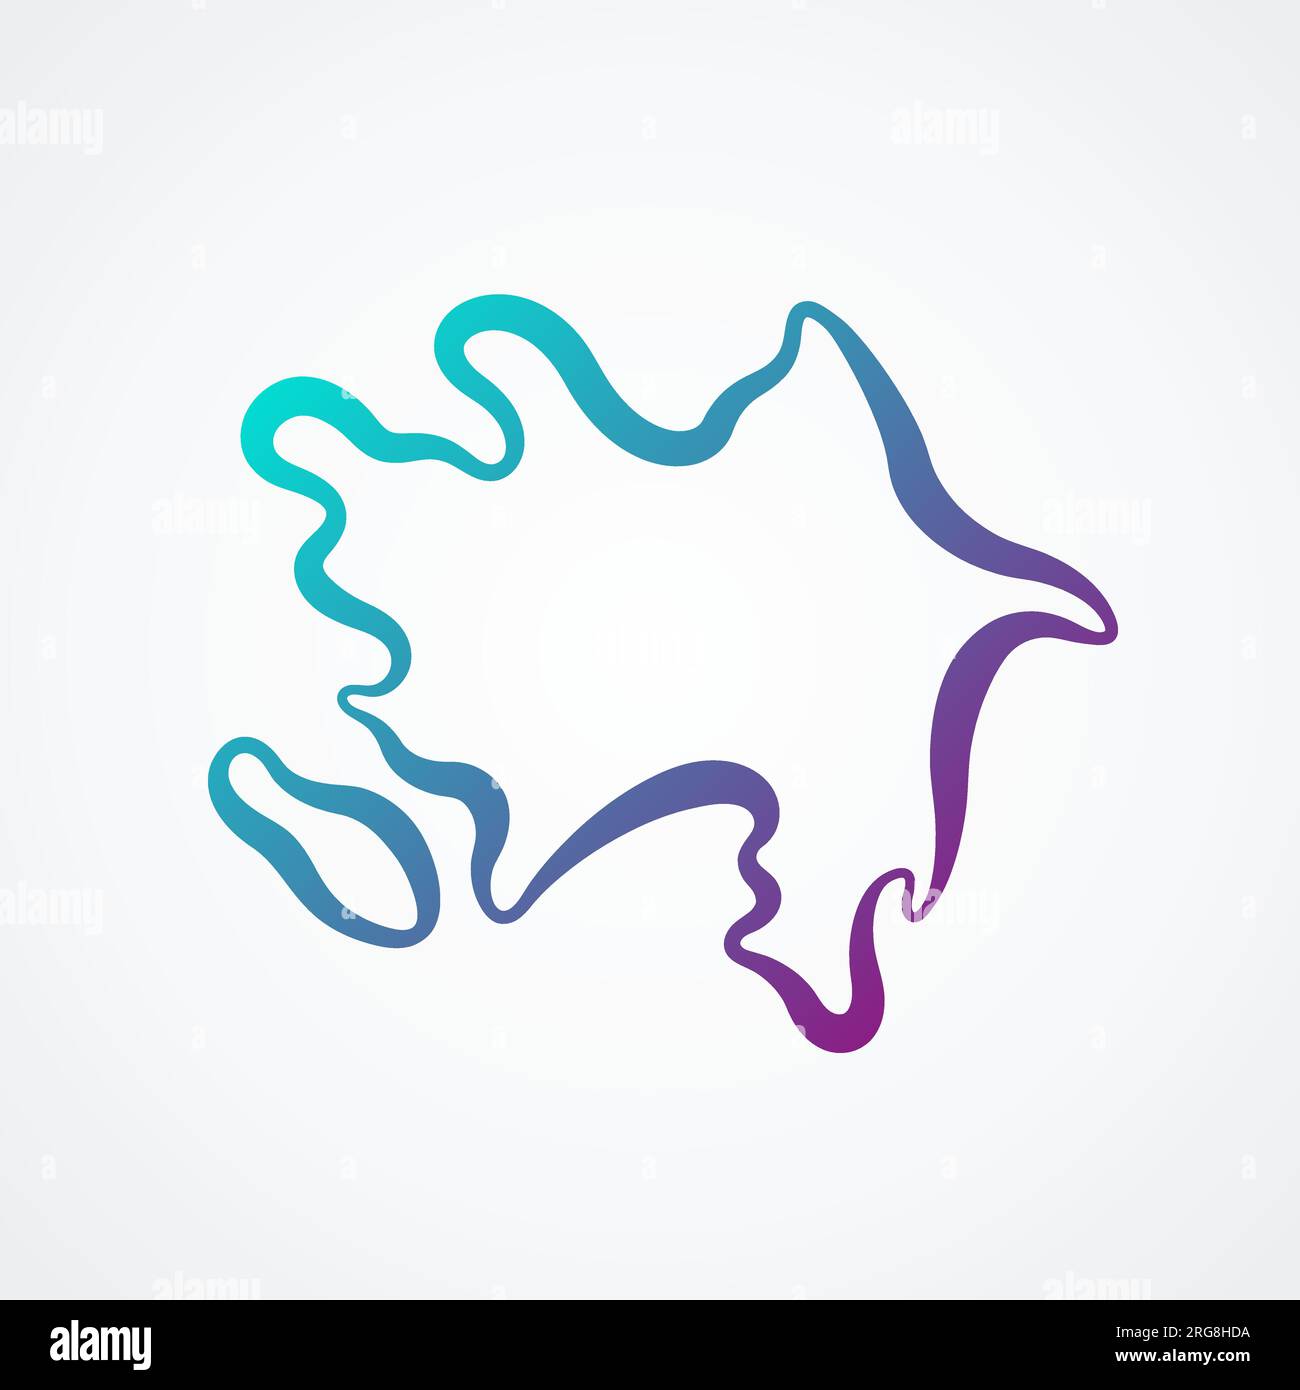 Outline map of Azerbaijan with blue-purple gradient. Stock Vector